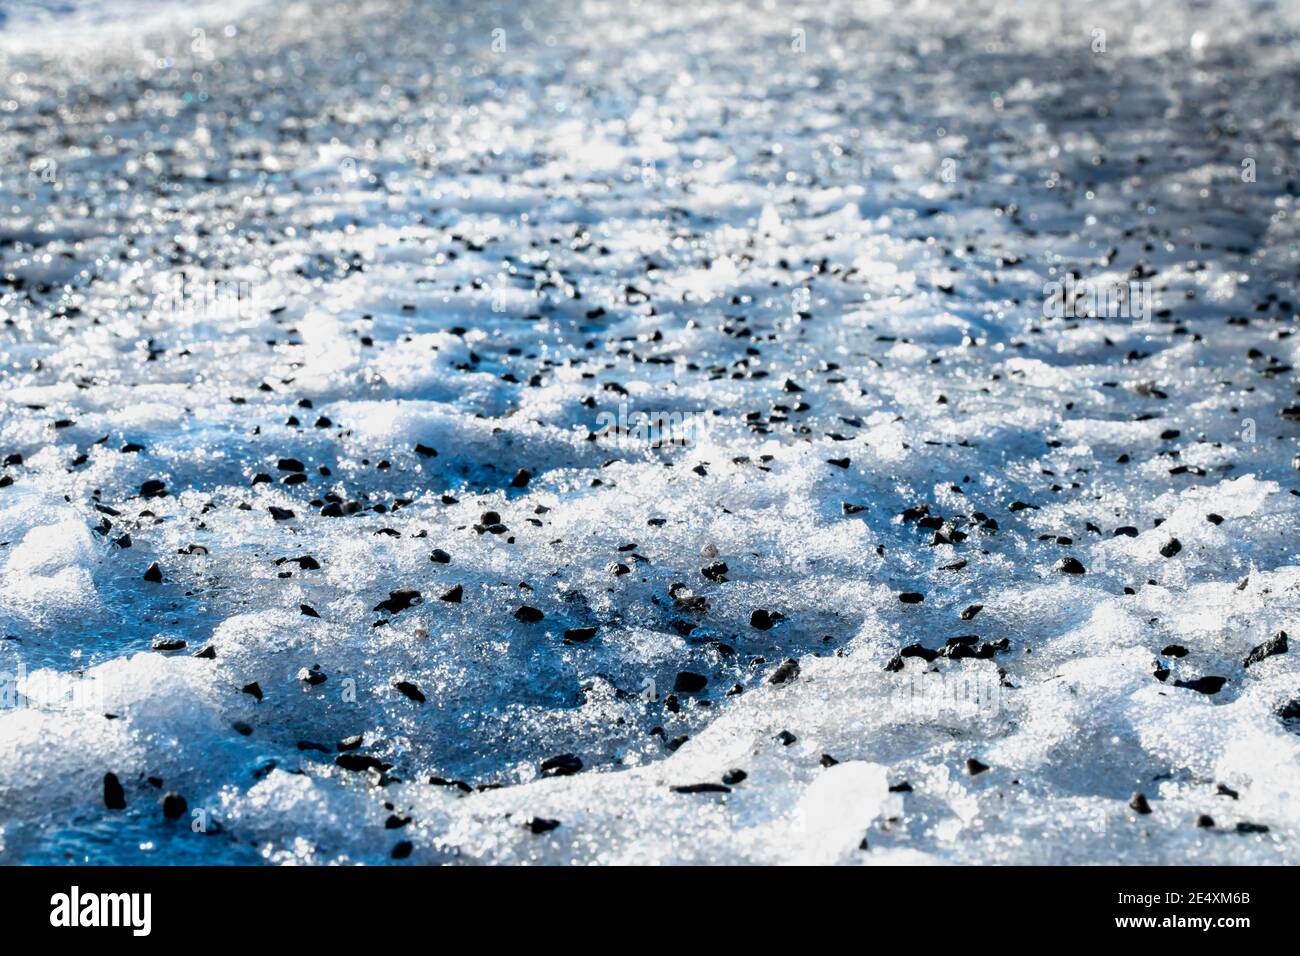 Close up of gravel strewn on an icy road. Stock Photo